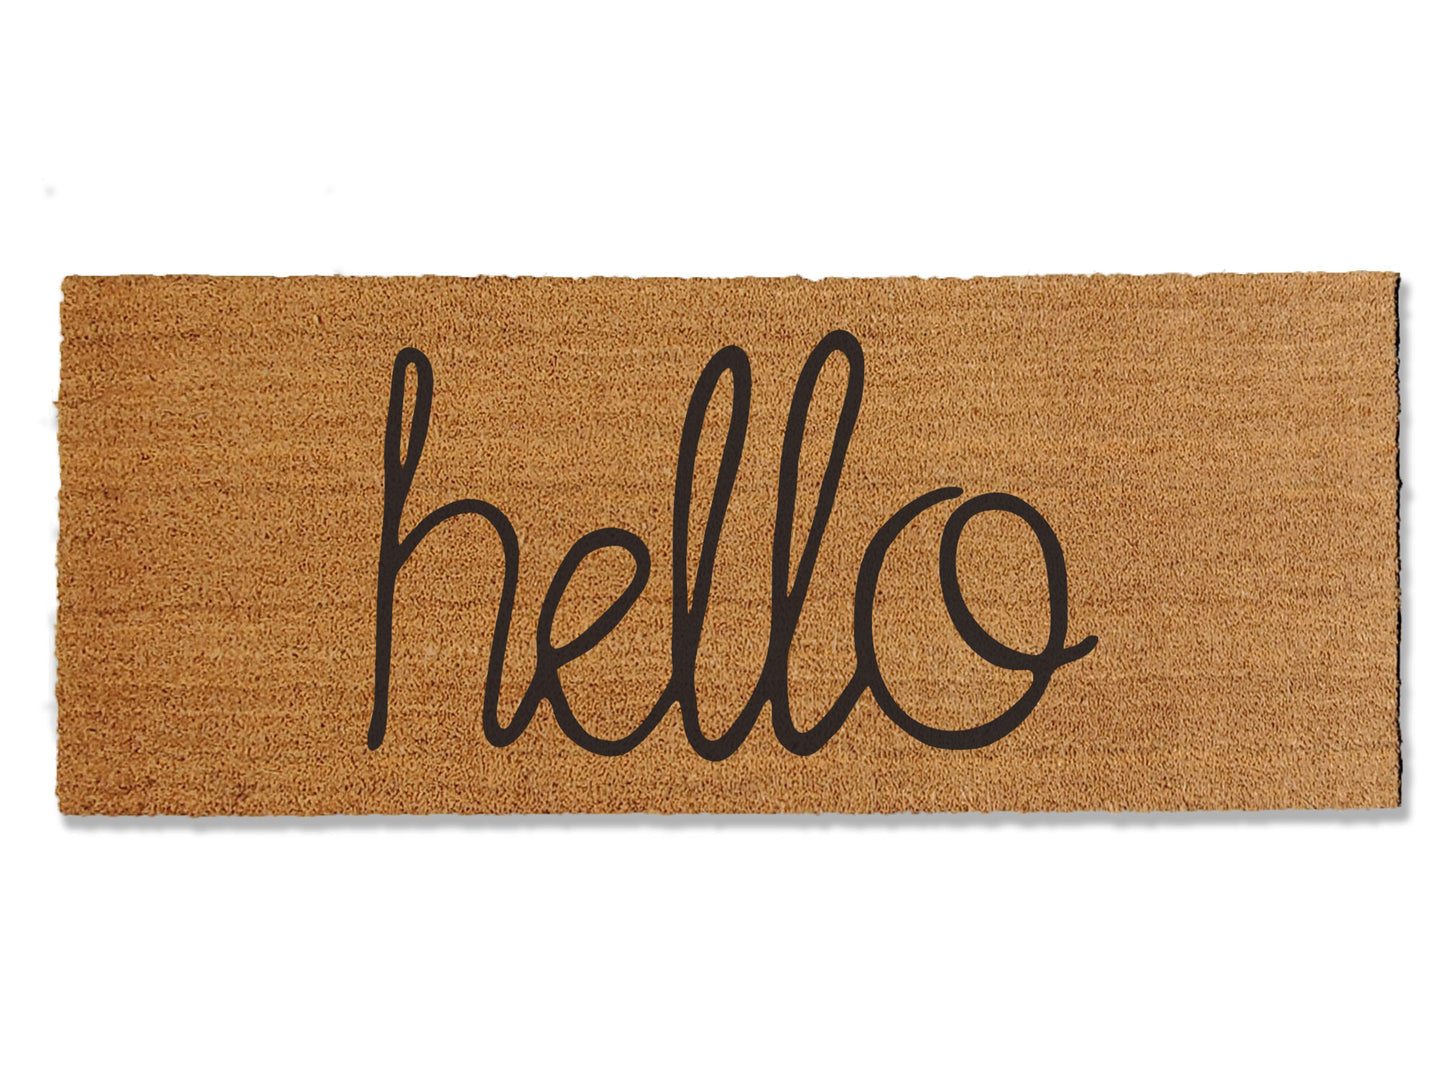 Invite warmth with our coir doormat featuring a hand-written 'Hello' greeting. Offered in multiple sizes, this versatile mat is ideal for year-round use, adding an elegant touch to your entryway. Beyond elevating your home's entrance, it serves as an effective barrier, preventing dirt from entering your space.